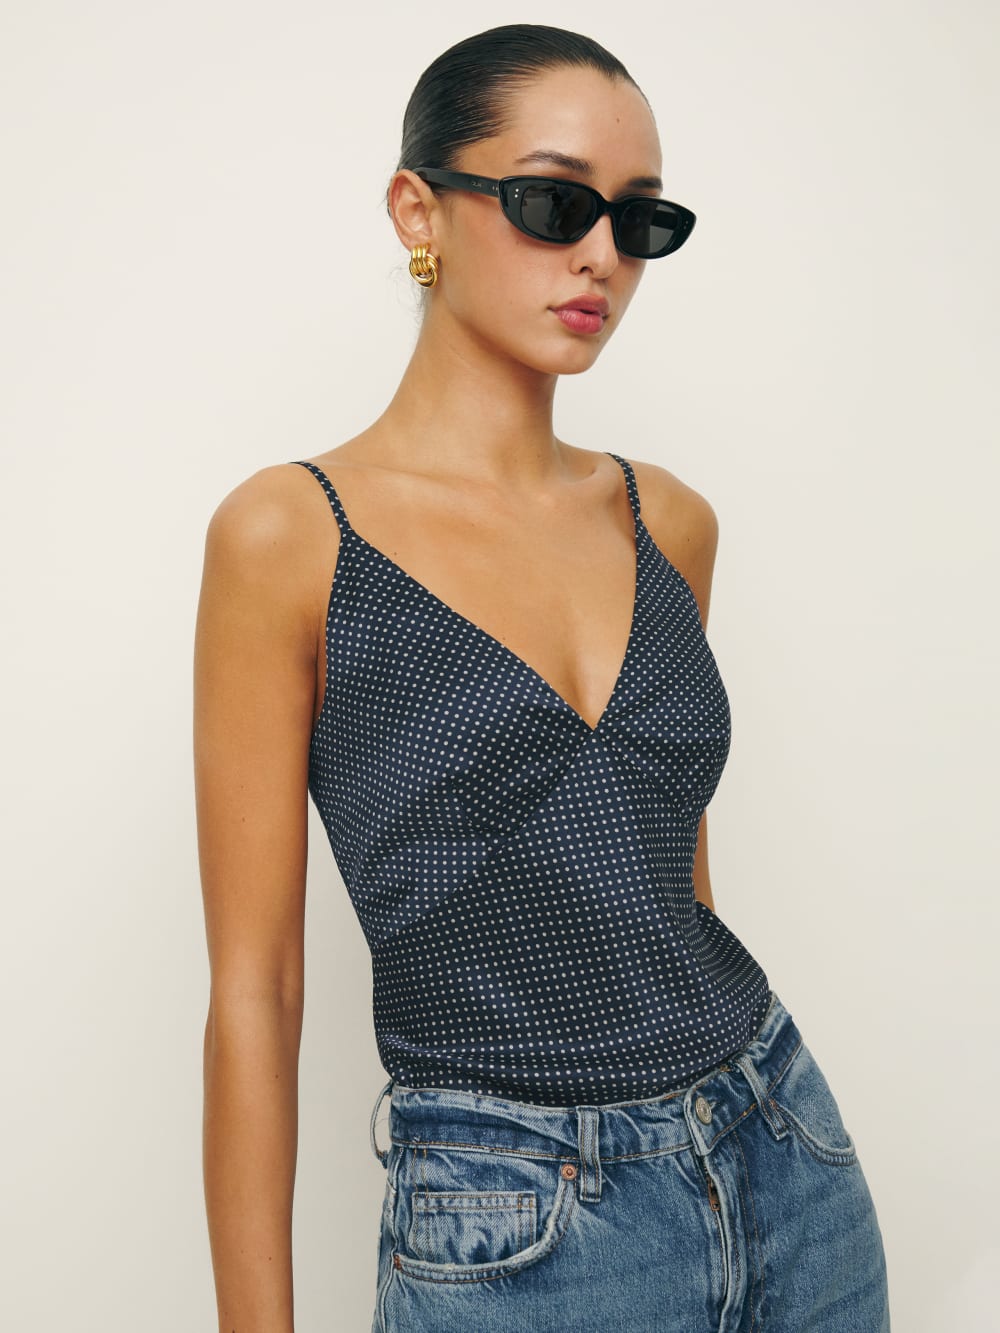 Mickey silk blue and white polka dot cami top with Adjustable straps.